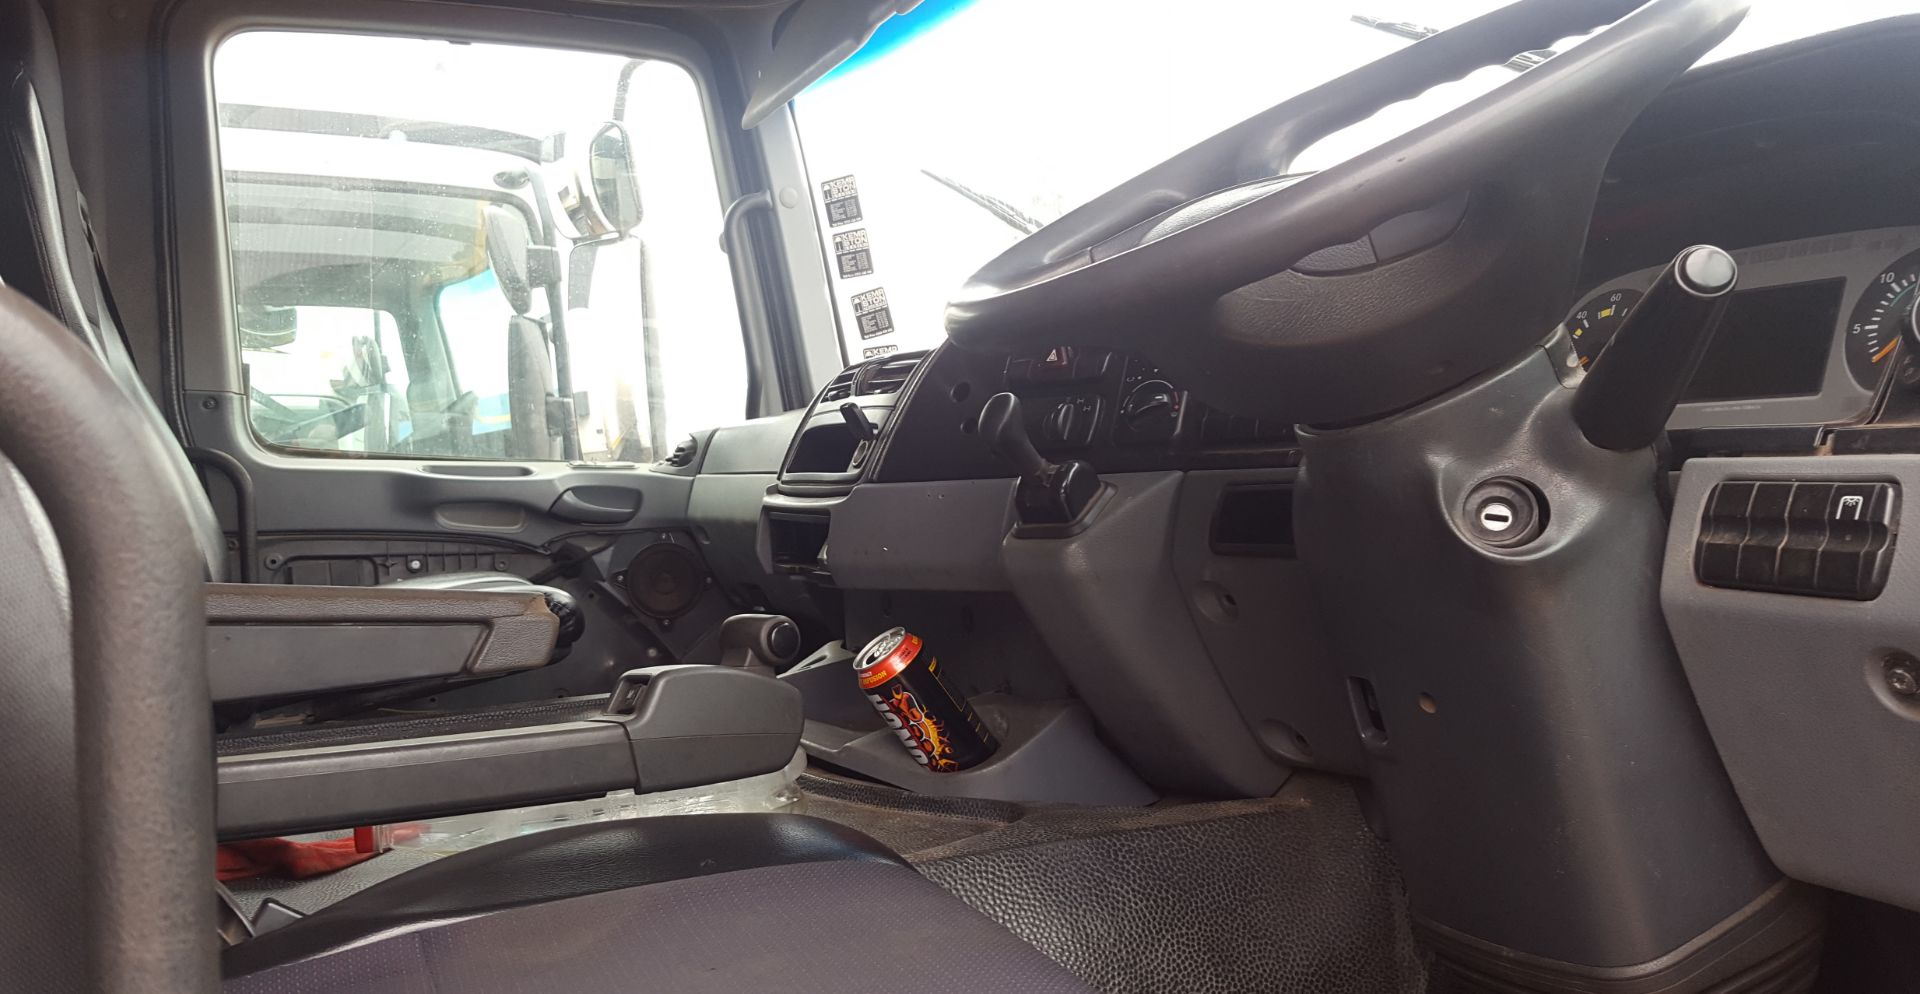 2007 M/BENZ ACTROS 3350 6X4 T/T - (FMG834EC) - Image 2 of 3